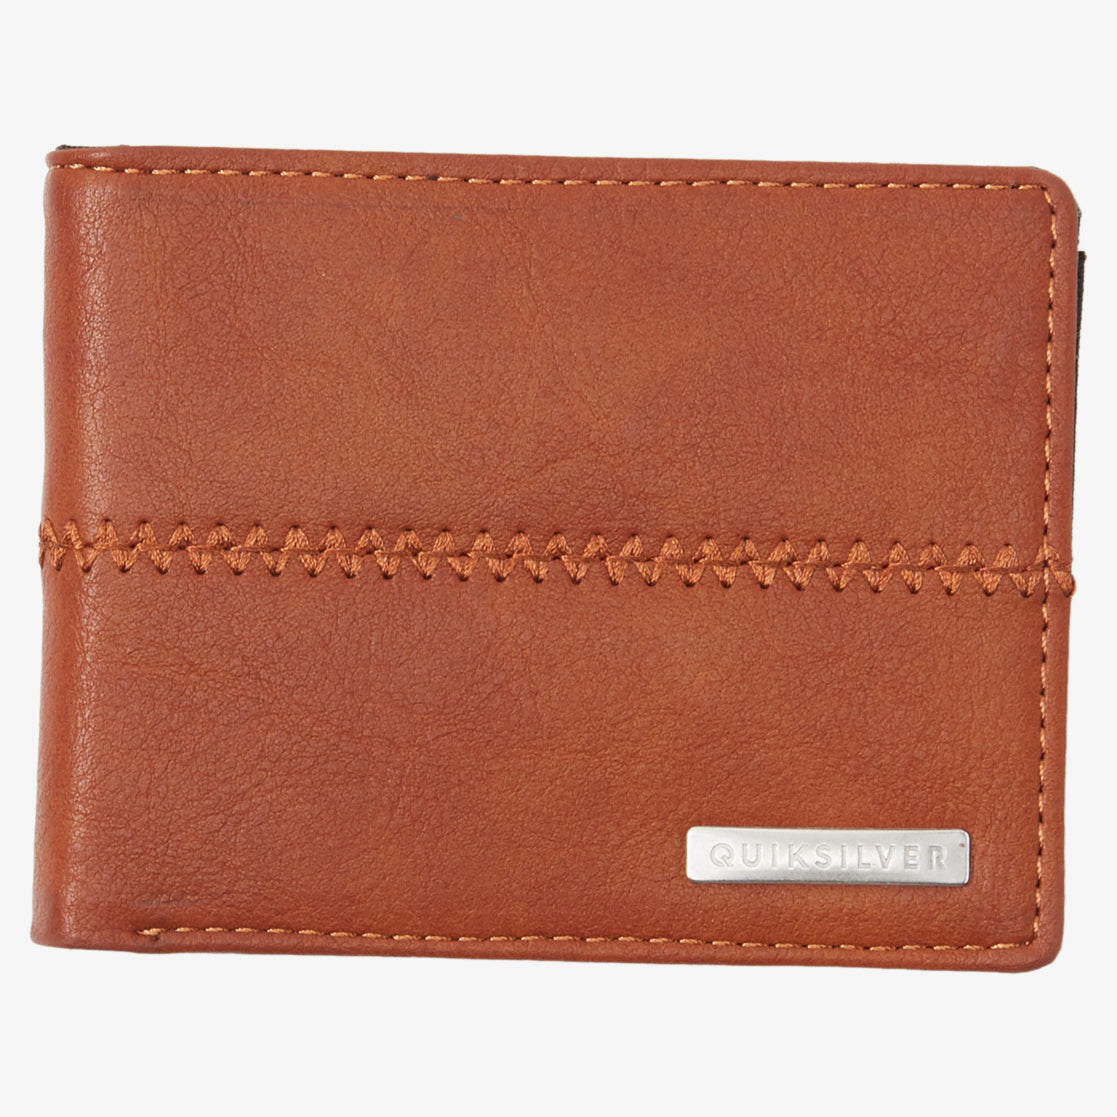 Quiksilver Stitchy 3 Wallets